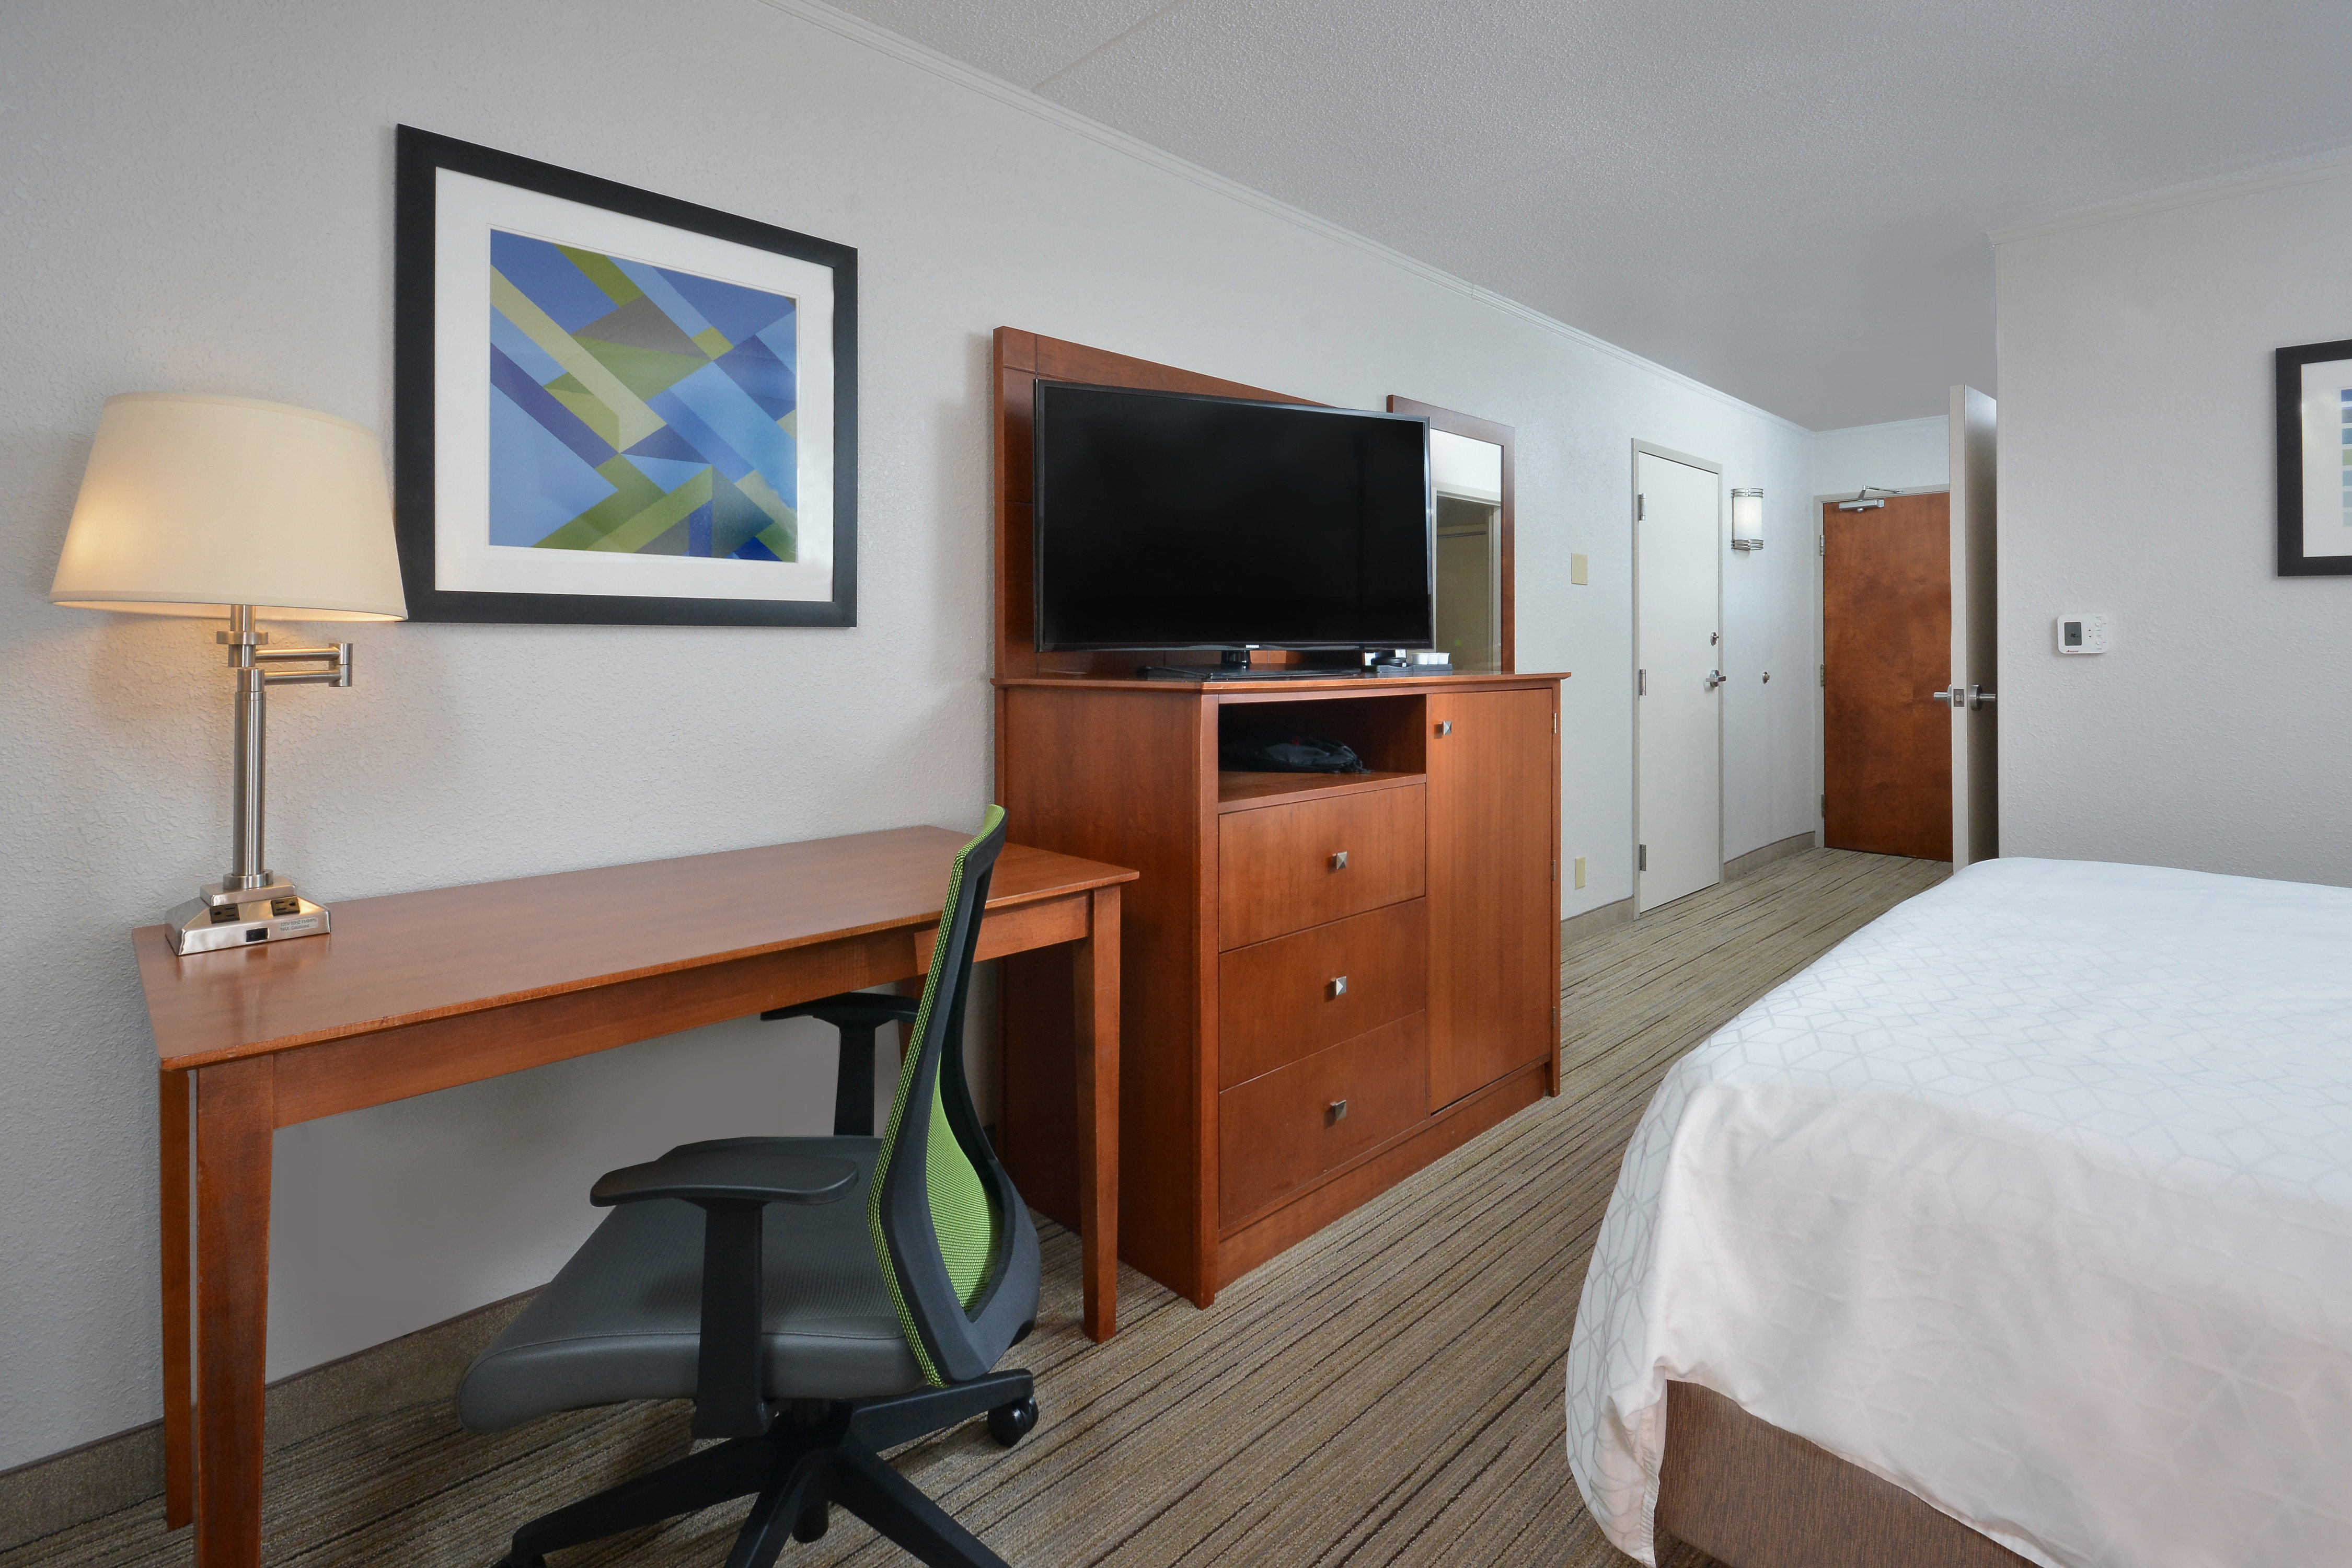 Our King Rooms in our Lynchburg hotel feature HDTV and more!